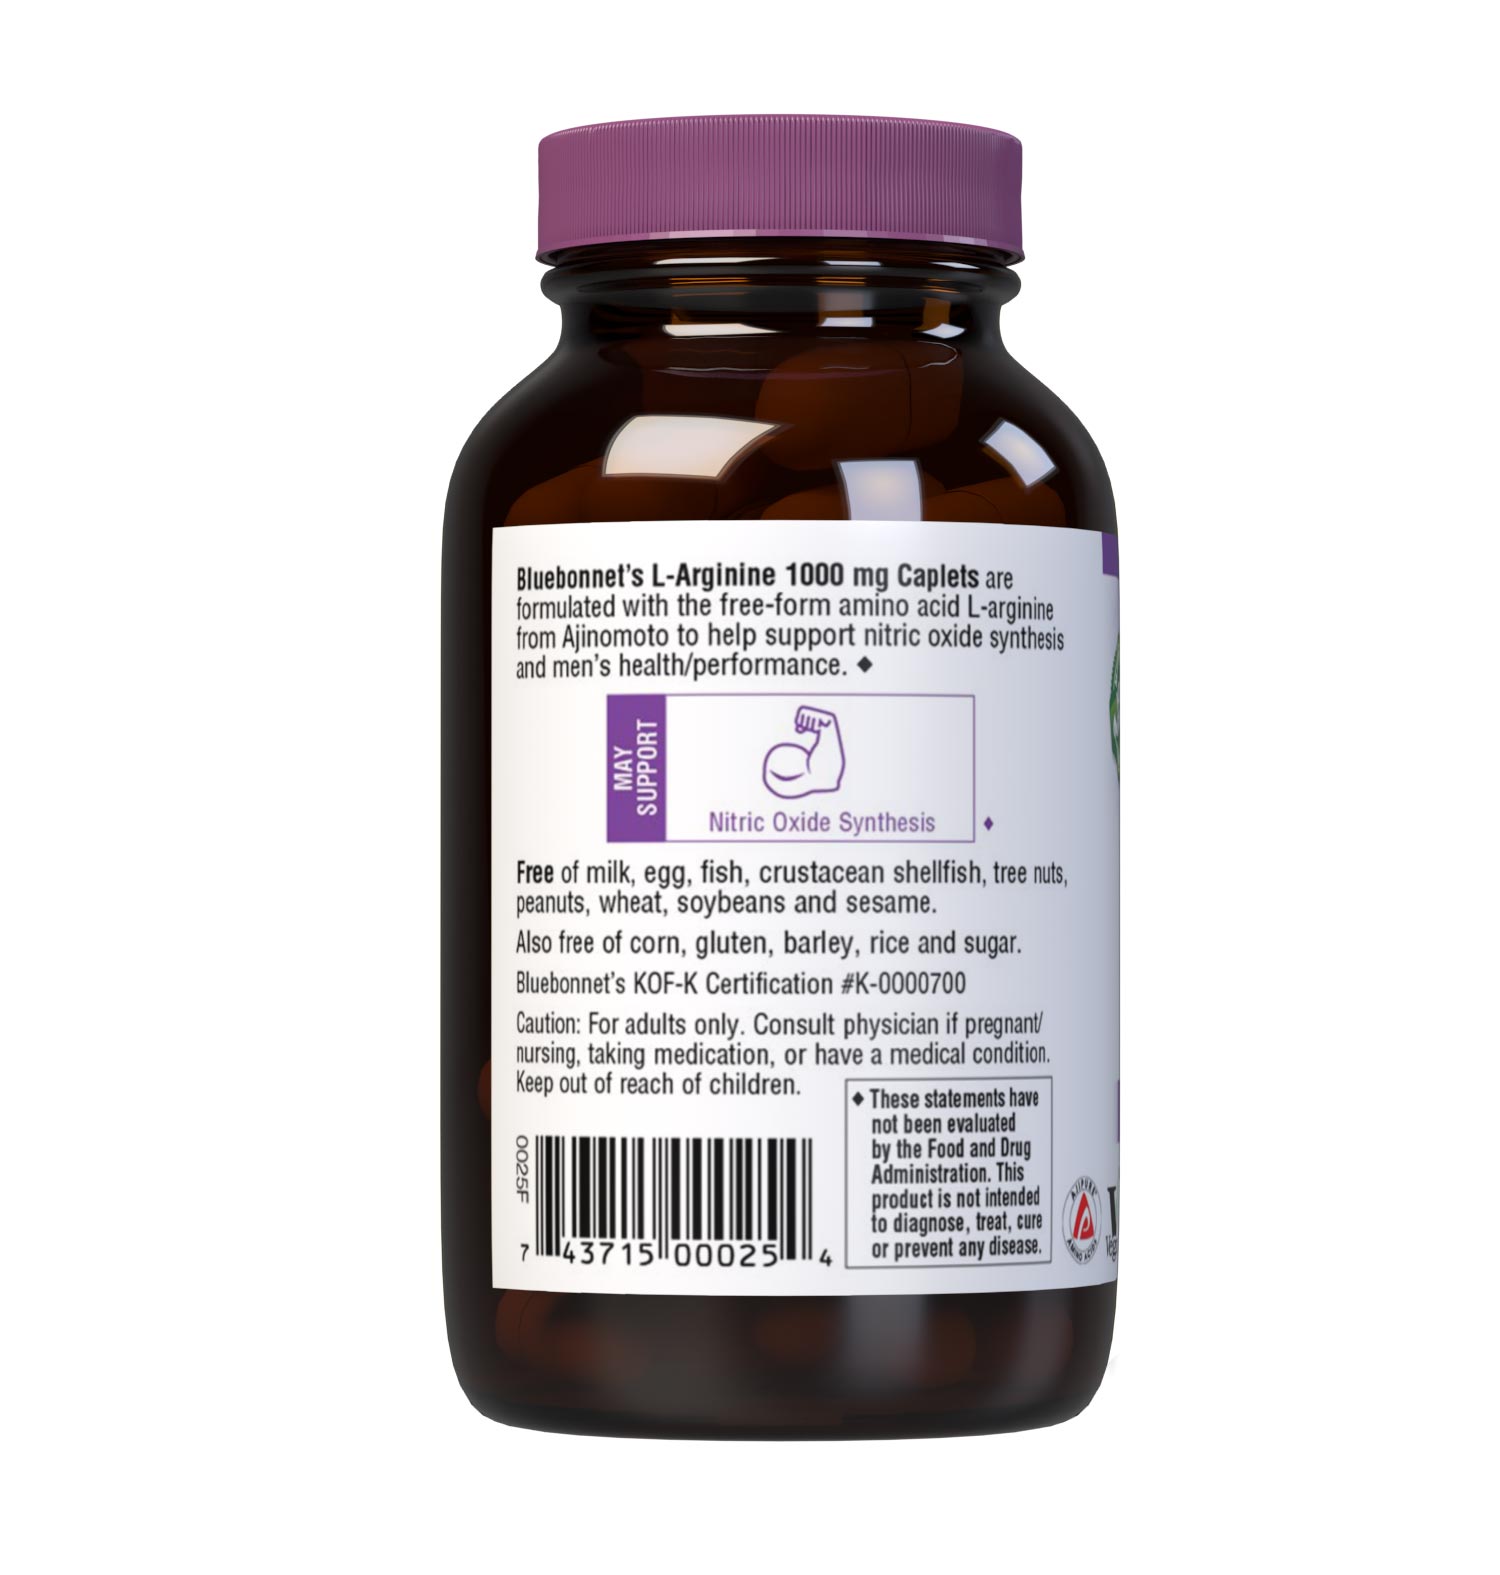 Bluebonnet’s L-Arginine 1000 mg 50 caplets are formulated with the free-form amino acid L-arginine in its crystalline form from Ajinomoto, which supports nitric oxide synthesis and men’s health/performance. description side render image. description panel. #size_50 count